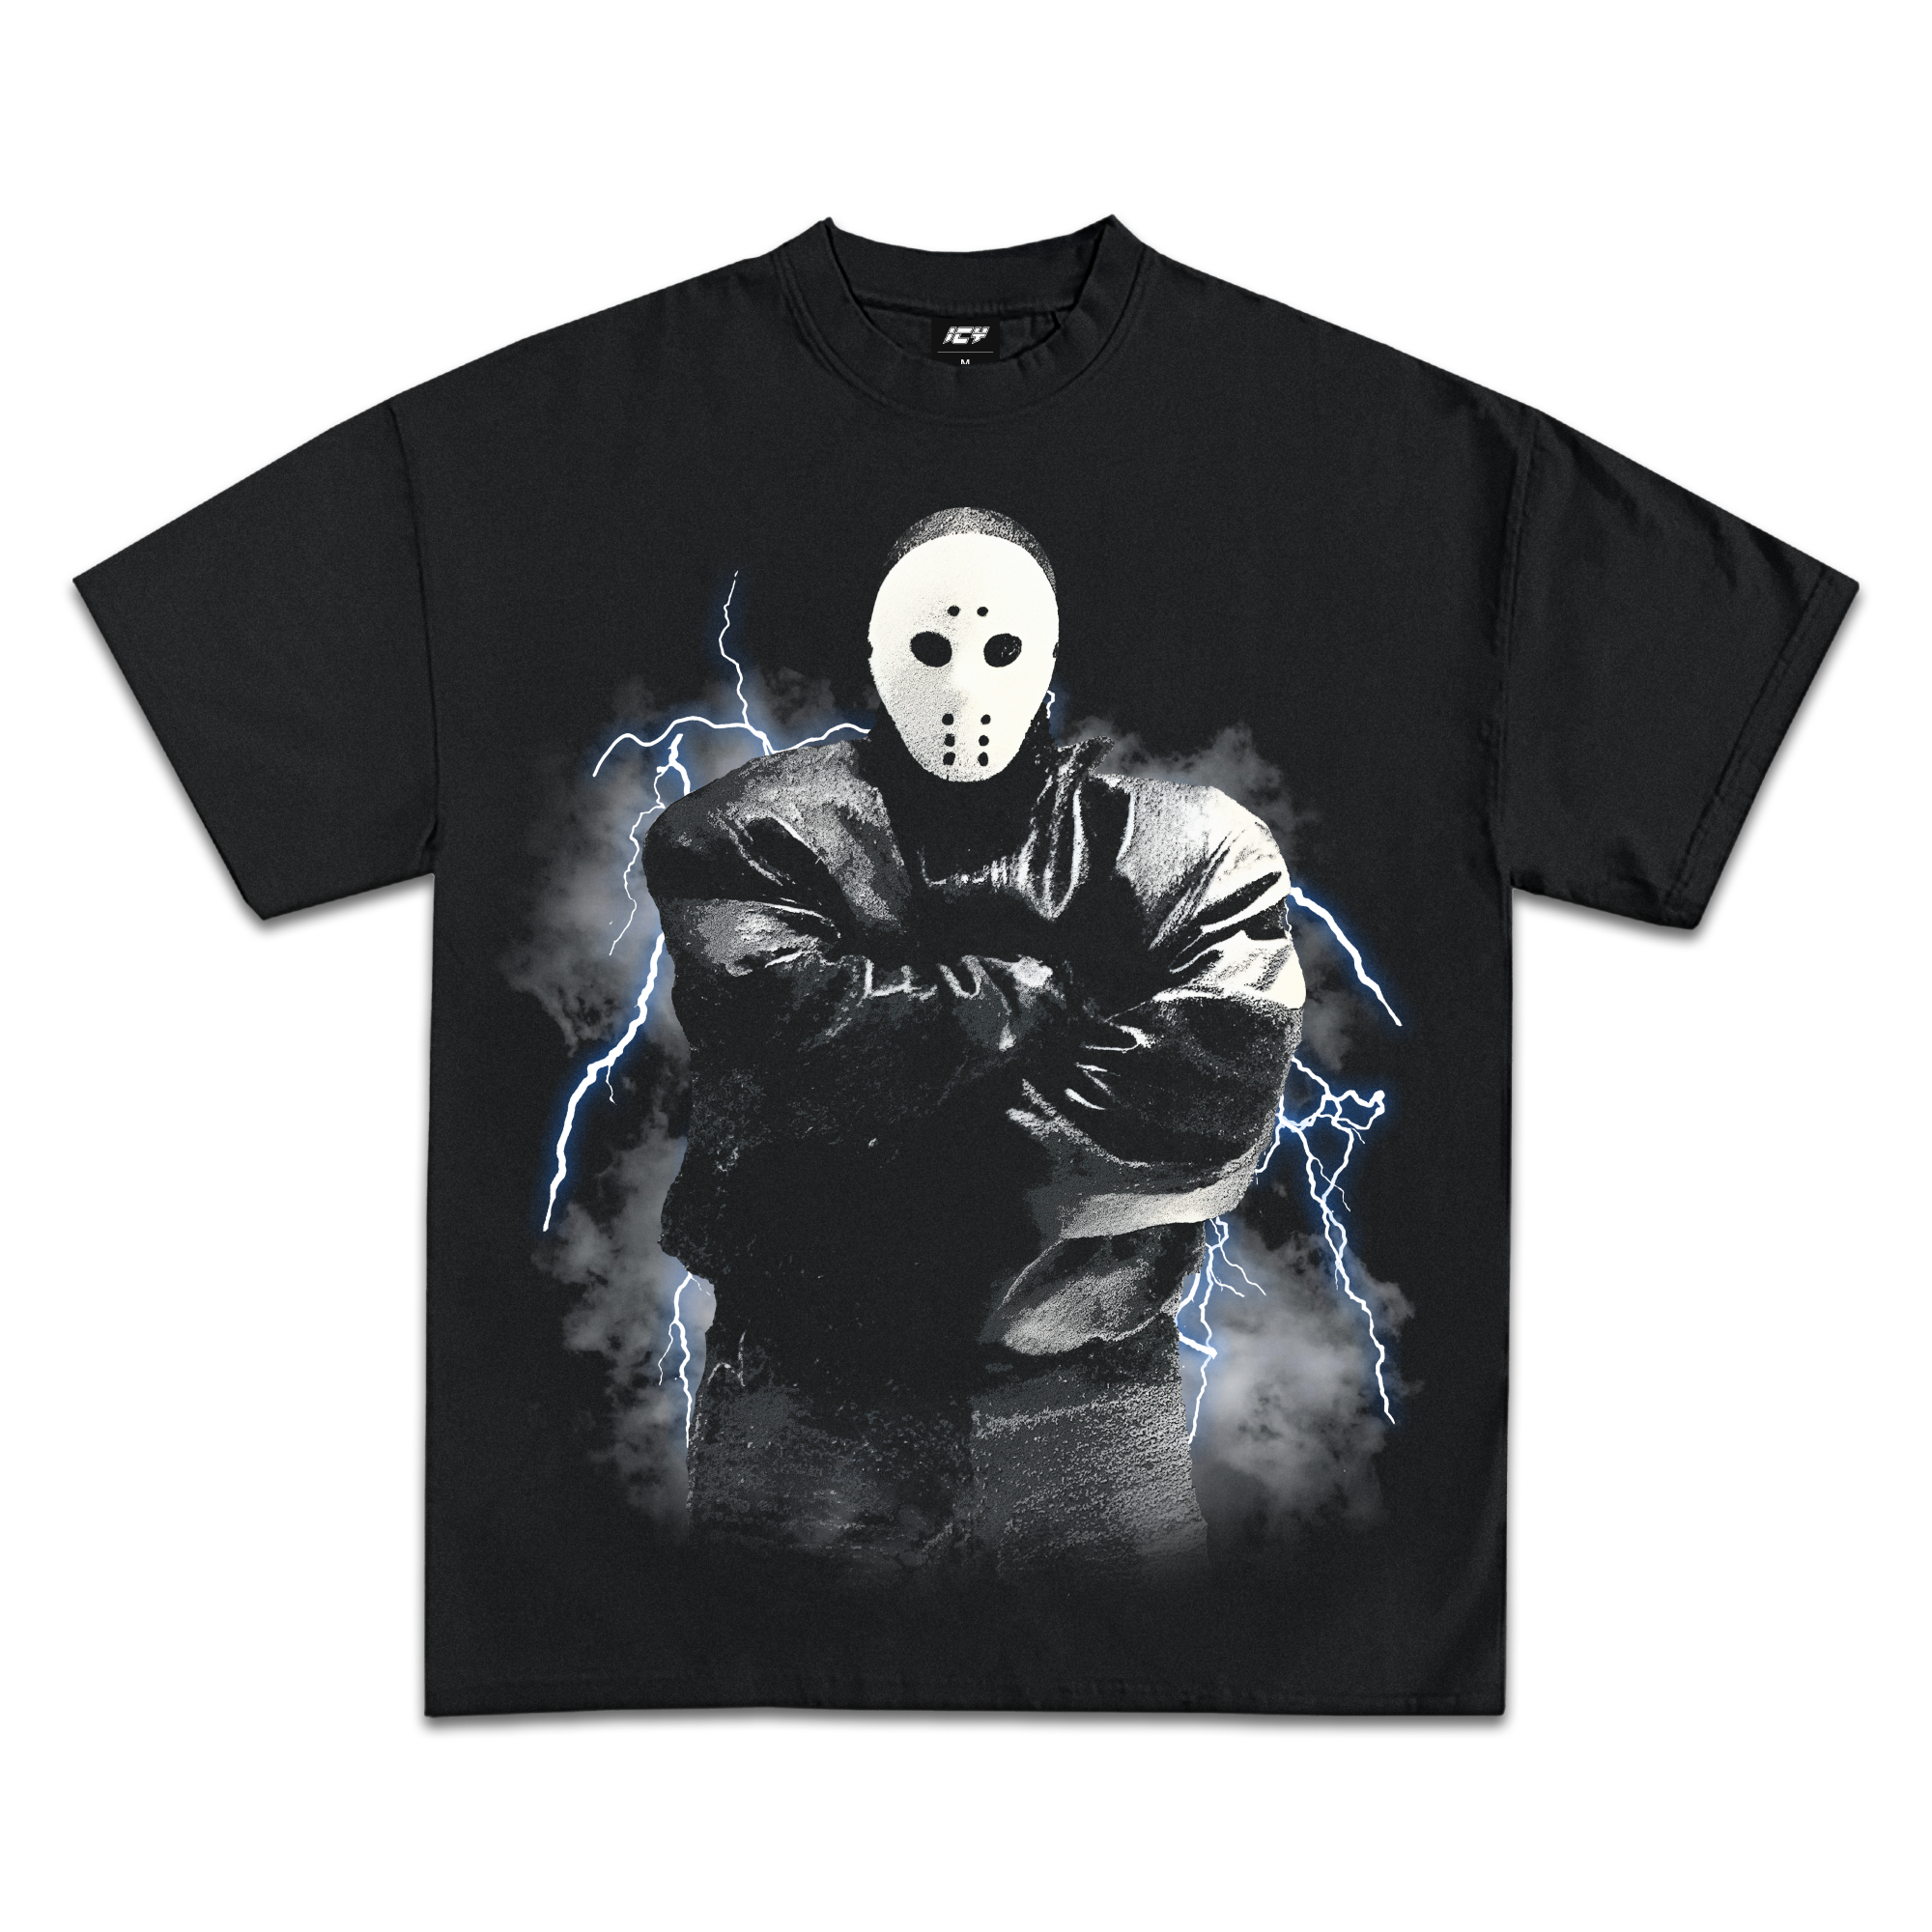 Kanye West Icy Exclusive Graphic T-Shirt